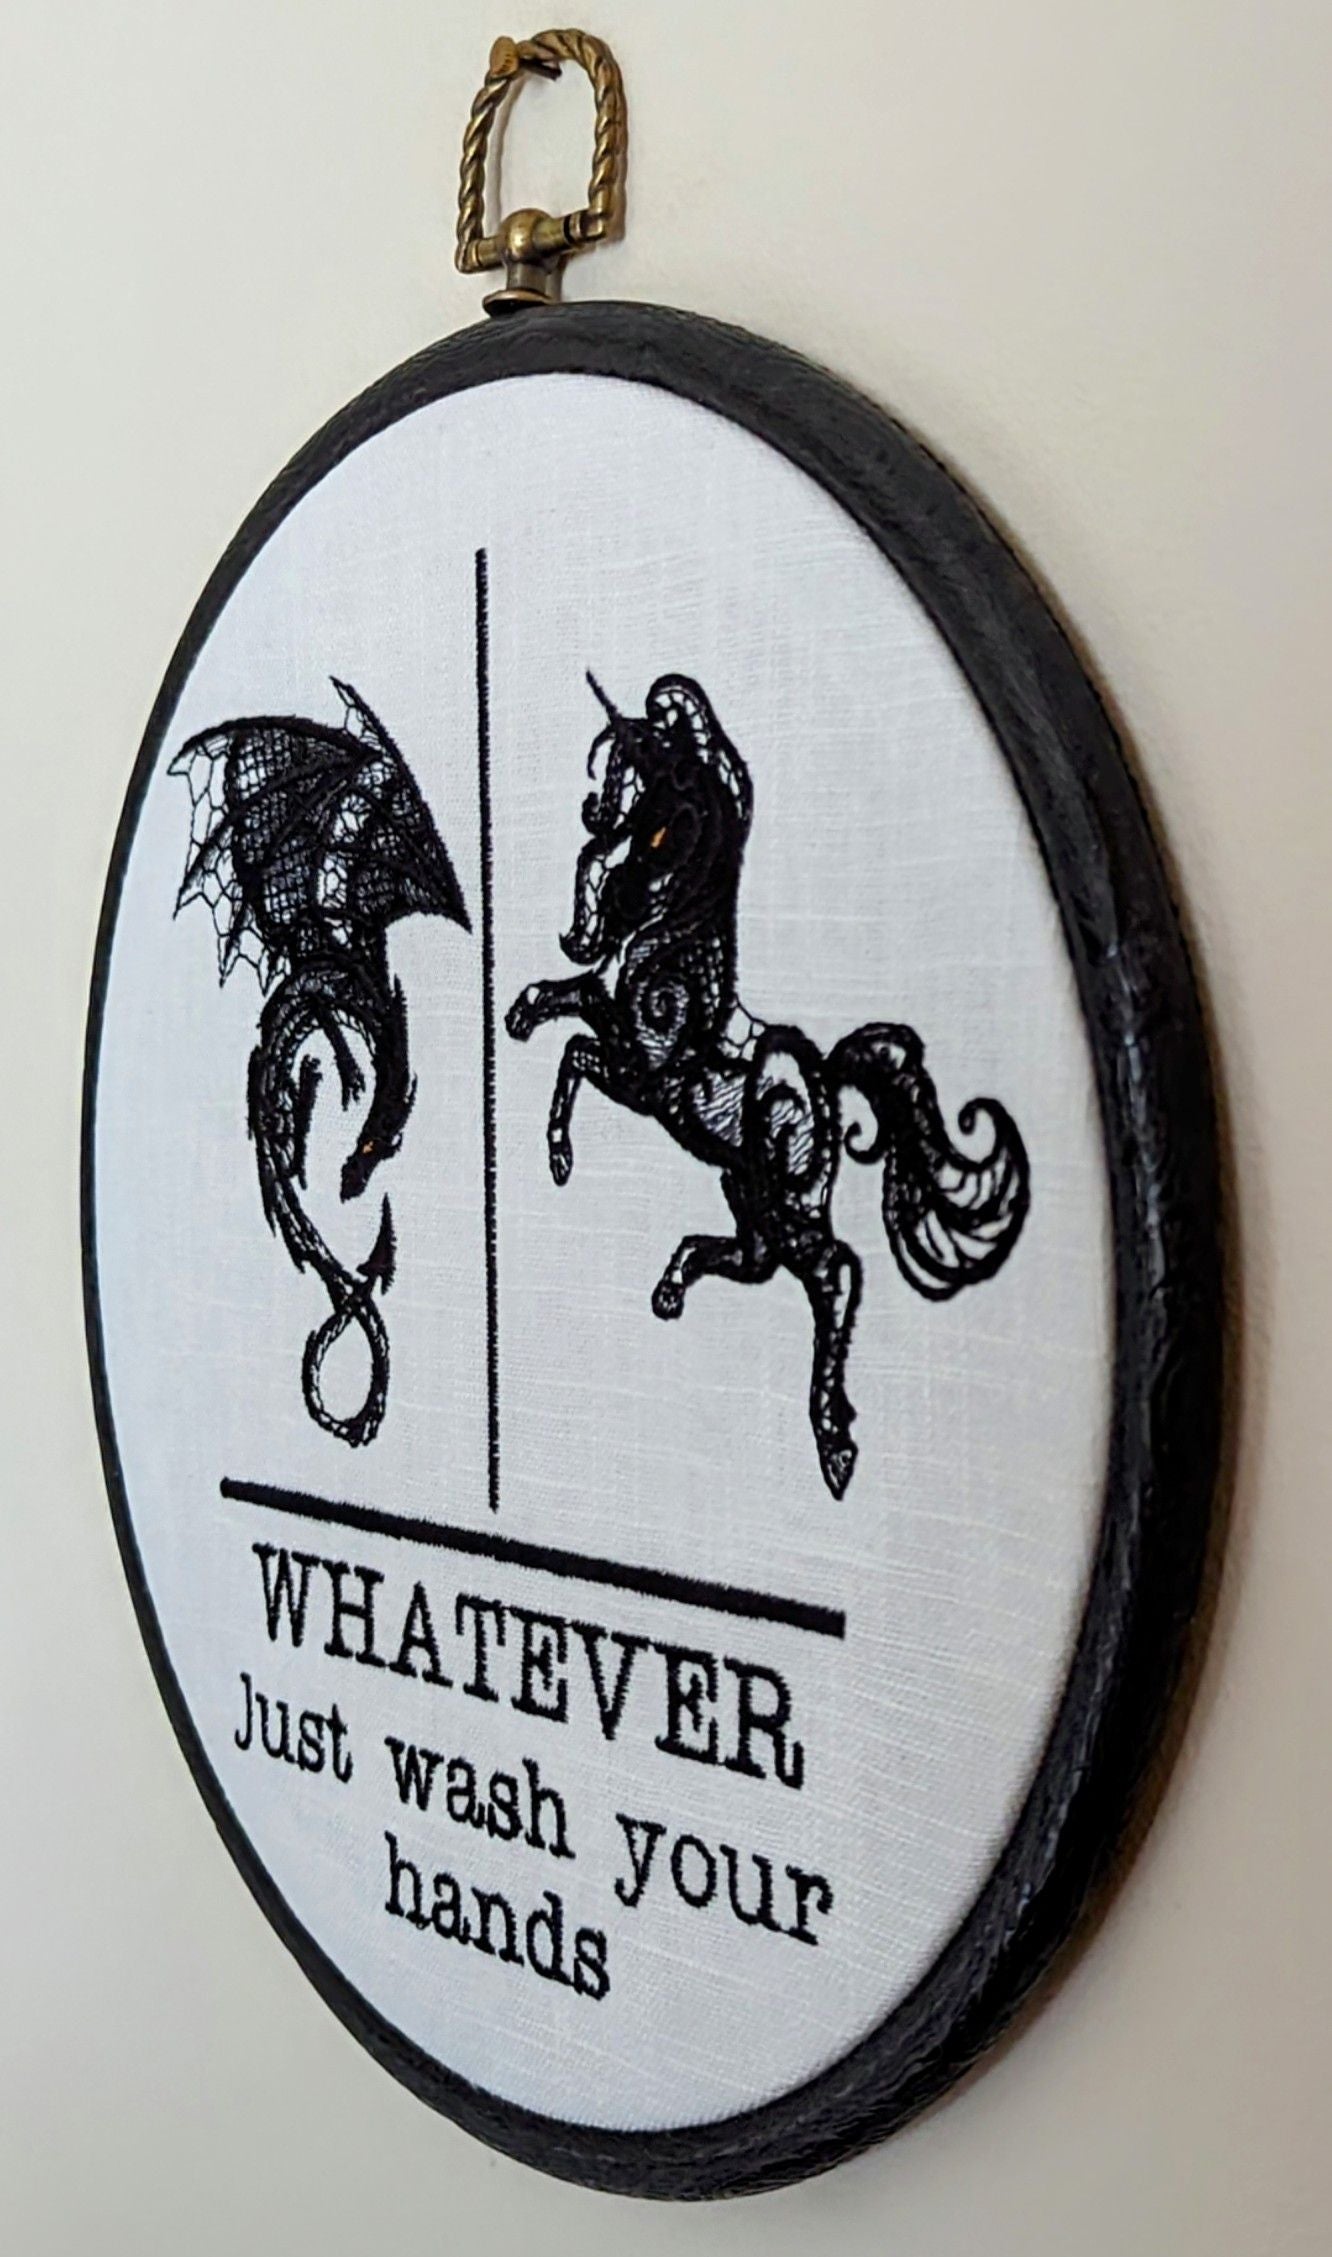 Whatever just wash your hands. Machine embroidery 8" hoop. Gothic décor, bathroom décor.